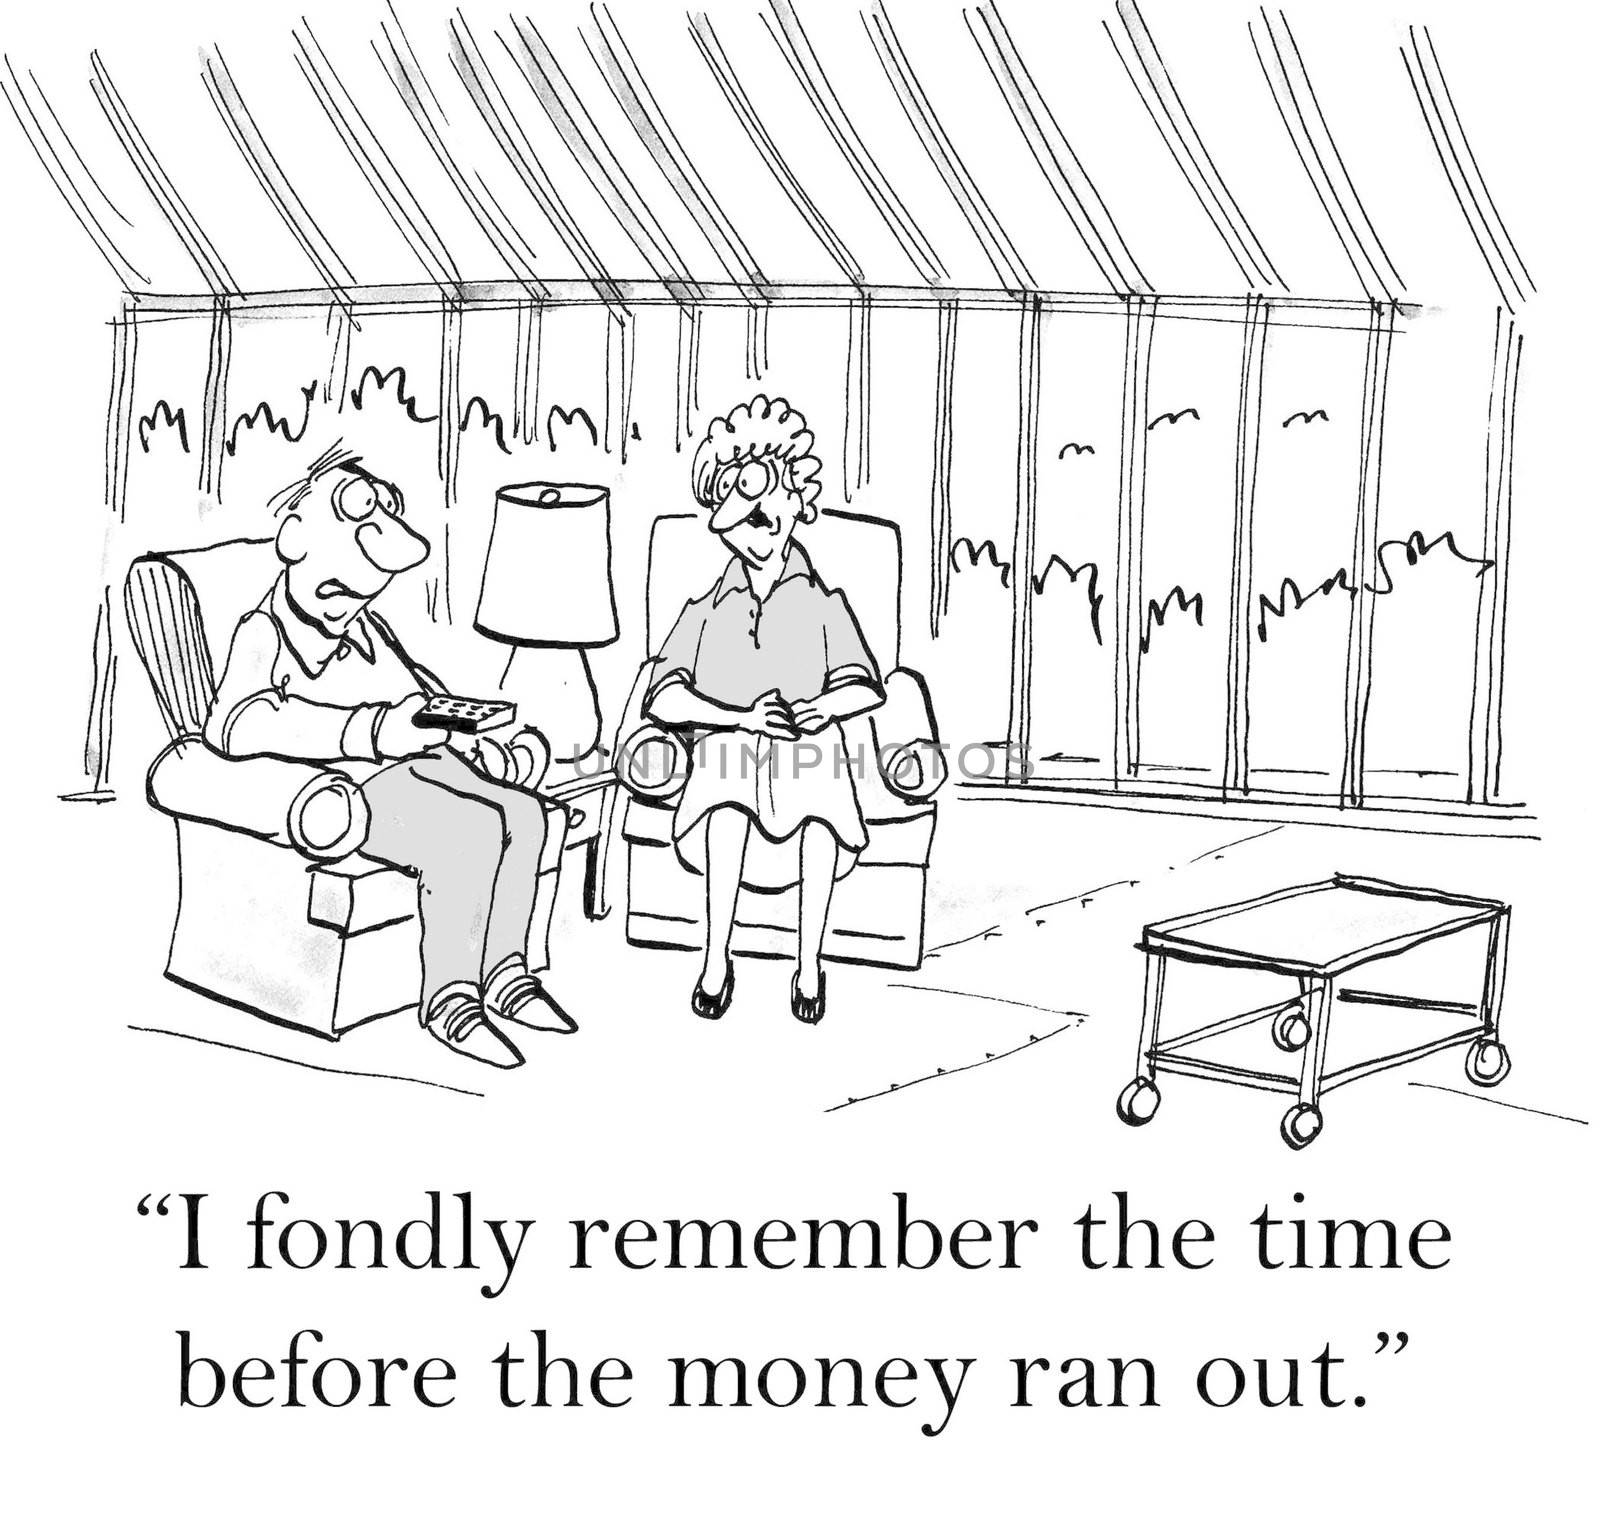 "I fondly remember the time before the money ran out."